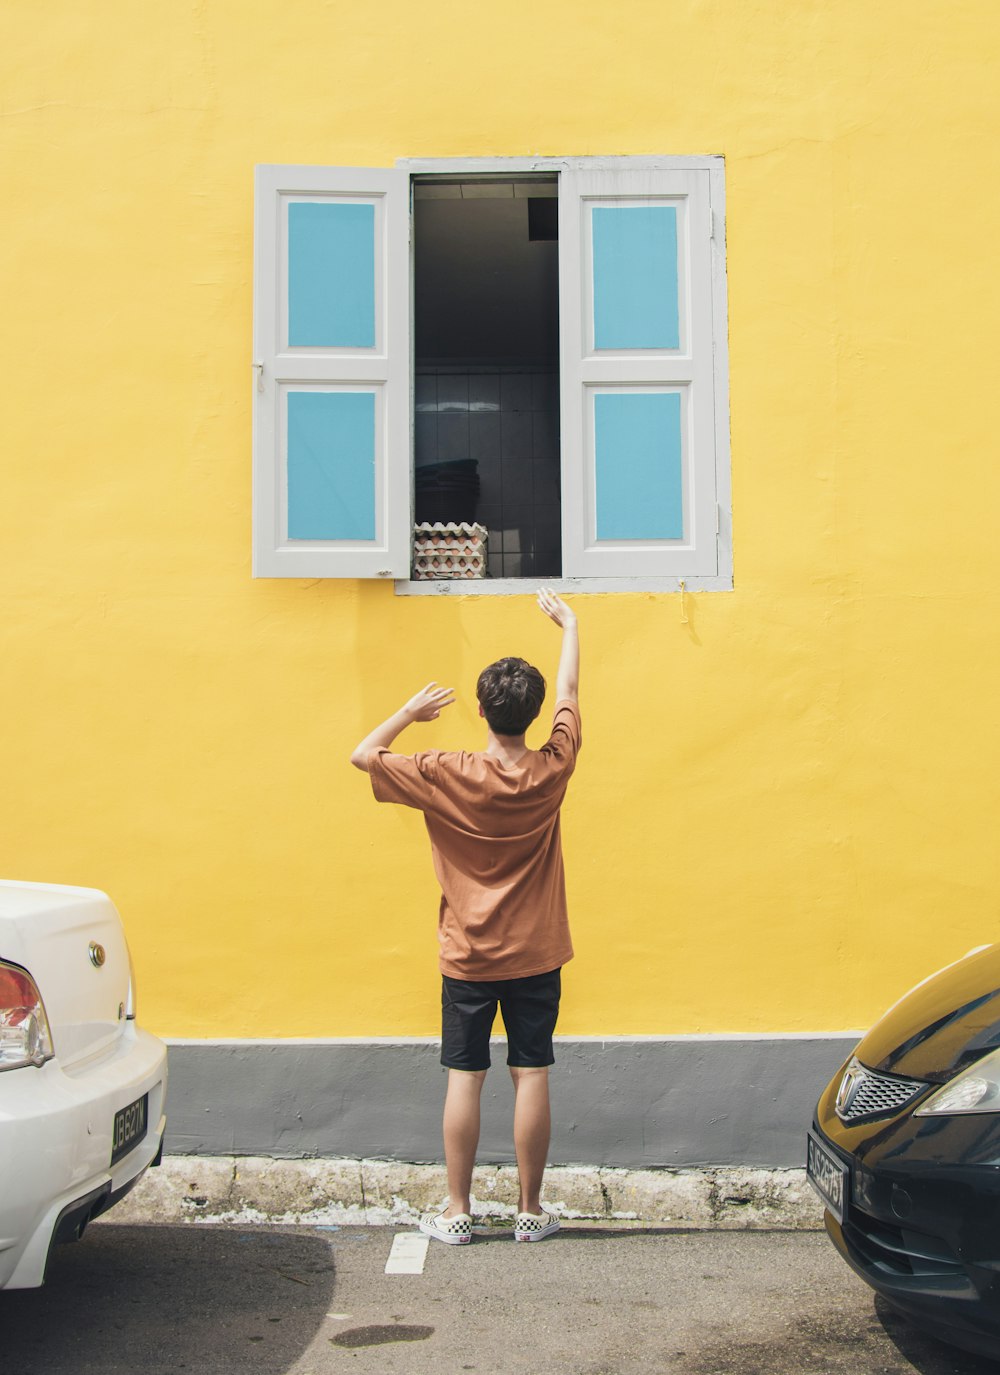 boy in front of window raising hand during daytime